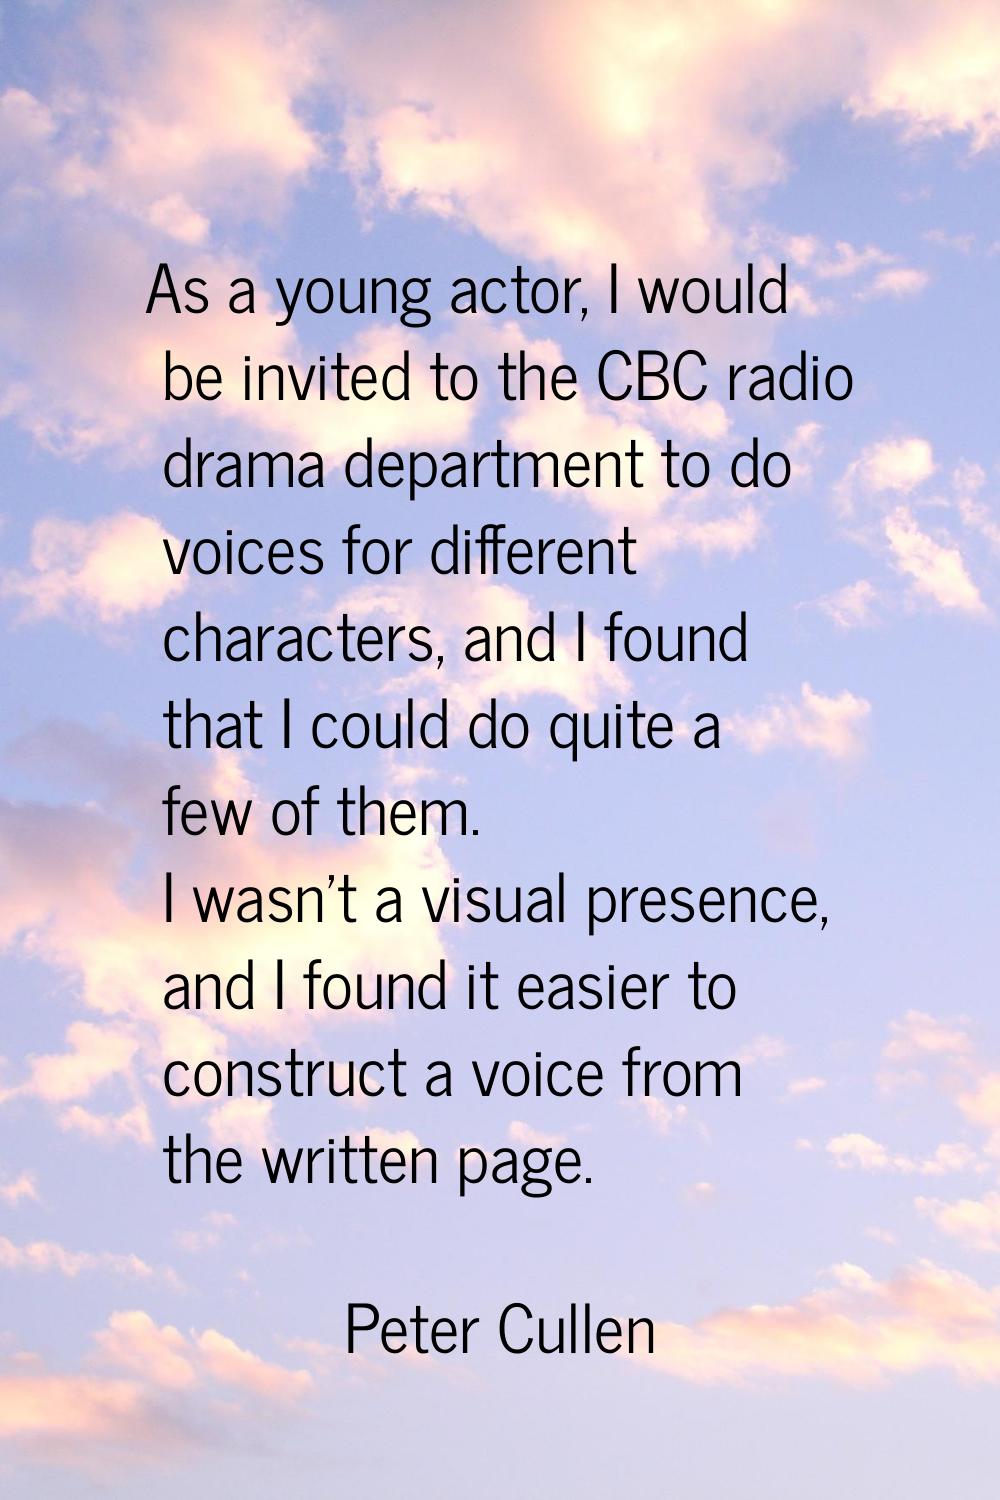 As a young actor, I would be invited to the CBC radio drama department to do voices for different c